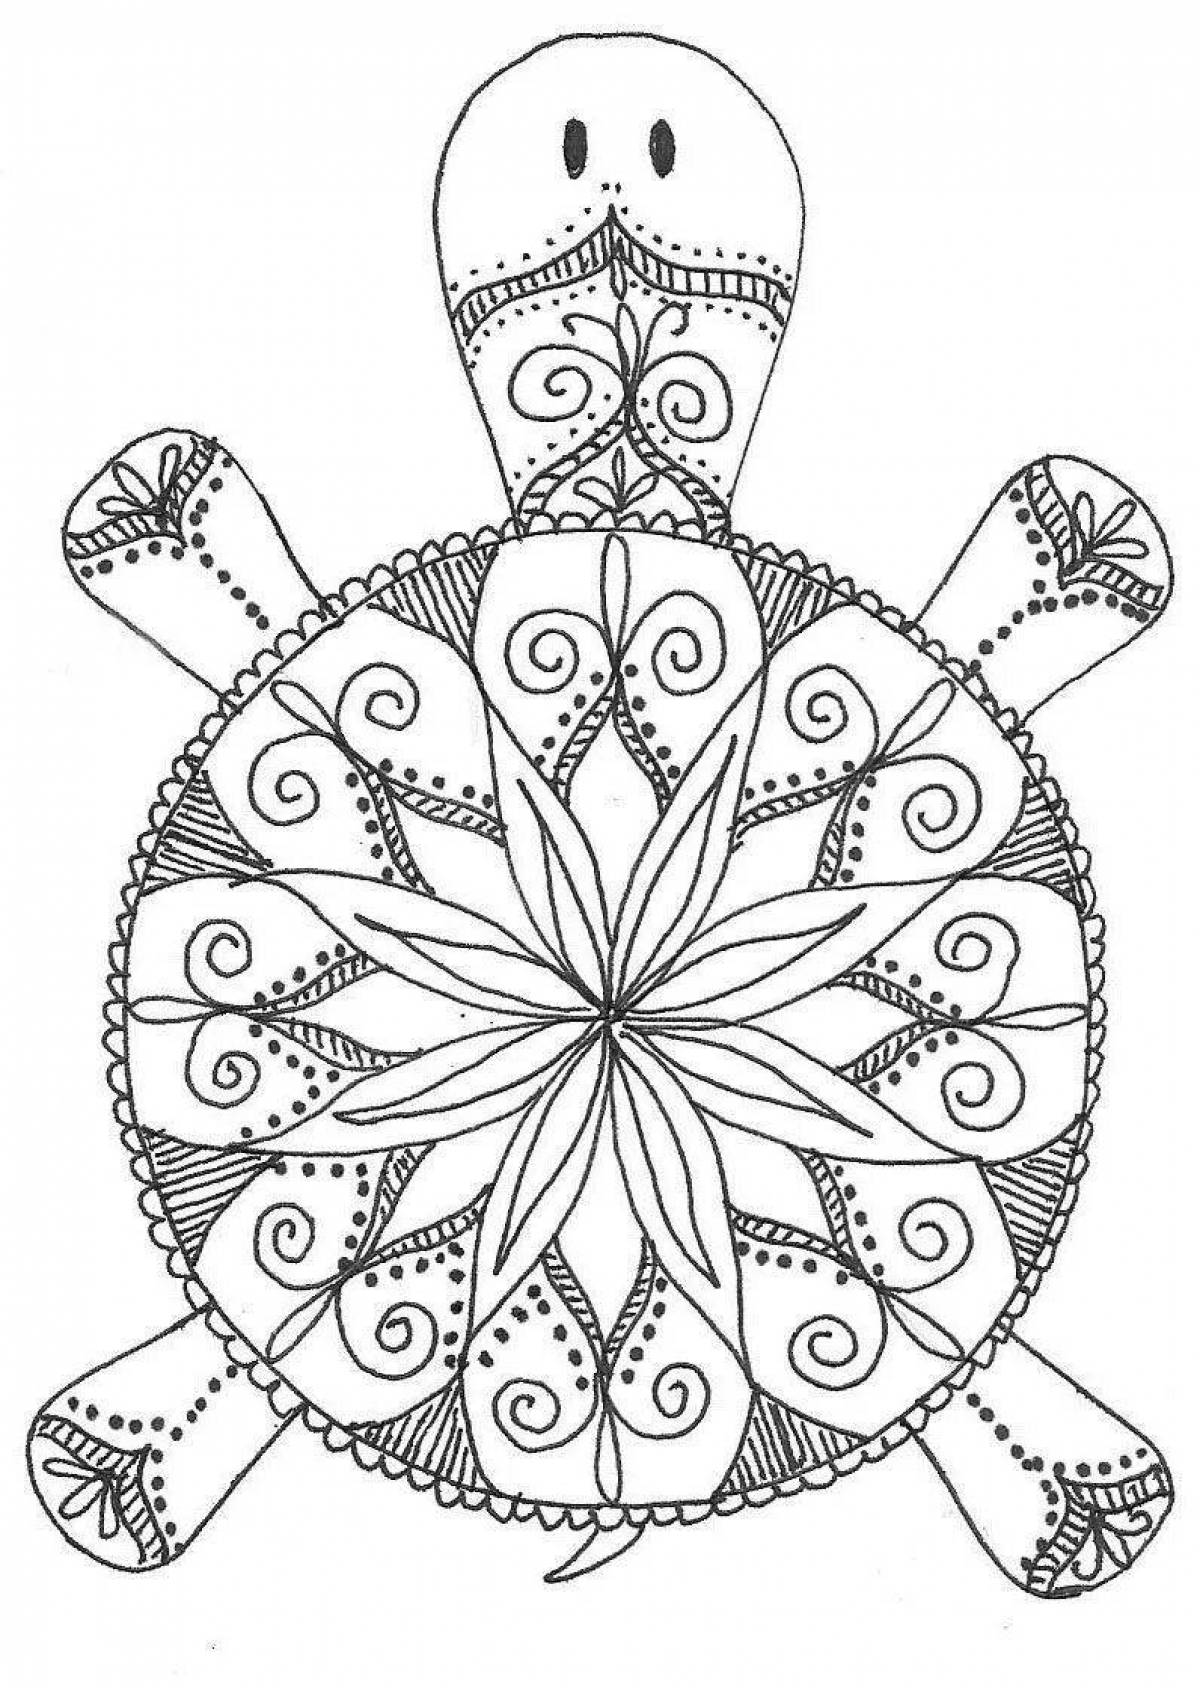 Colorful mantra coloring pages for preschoolers